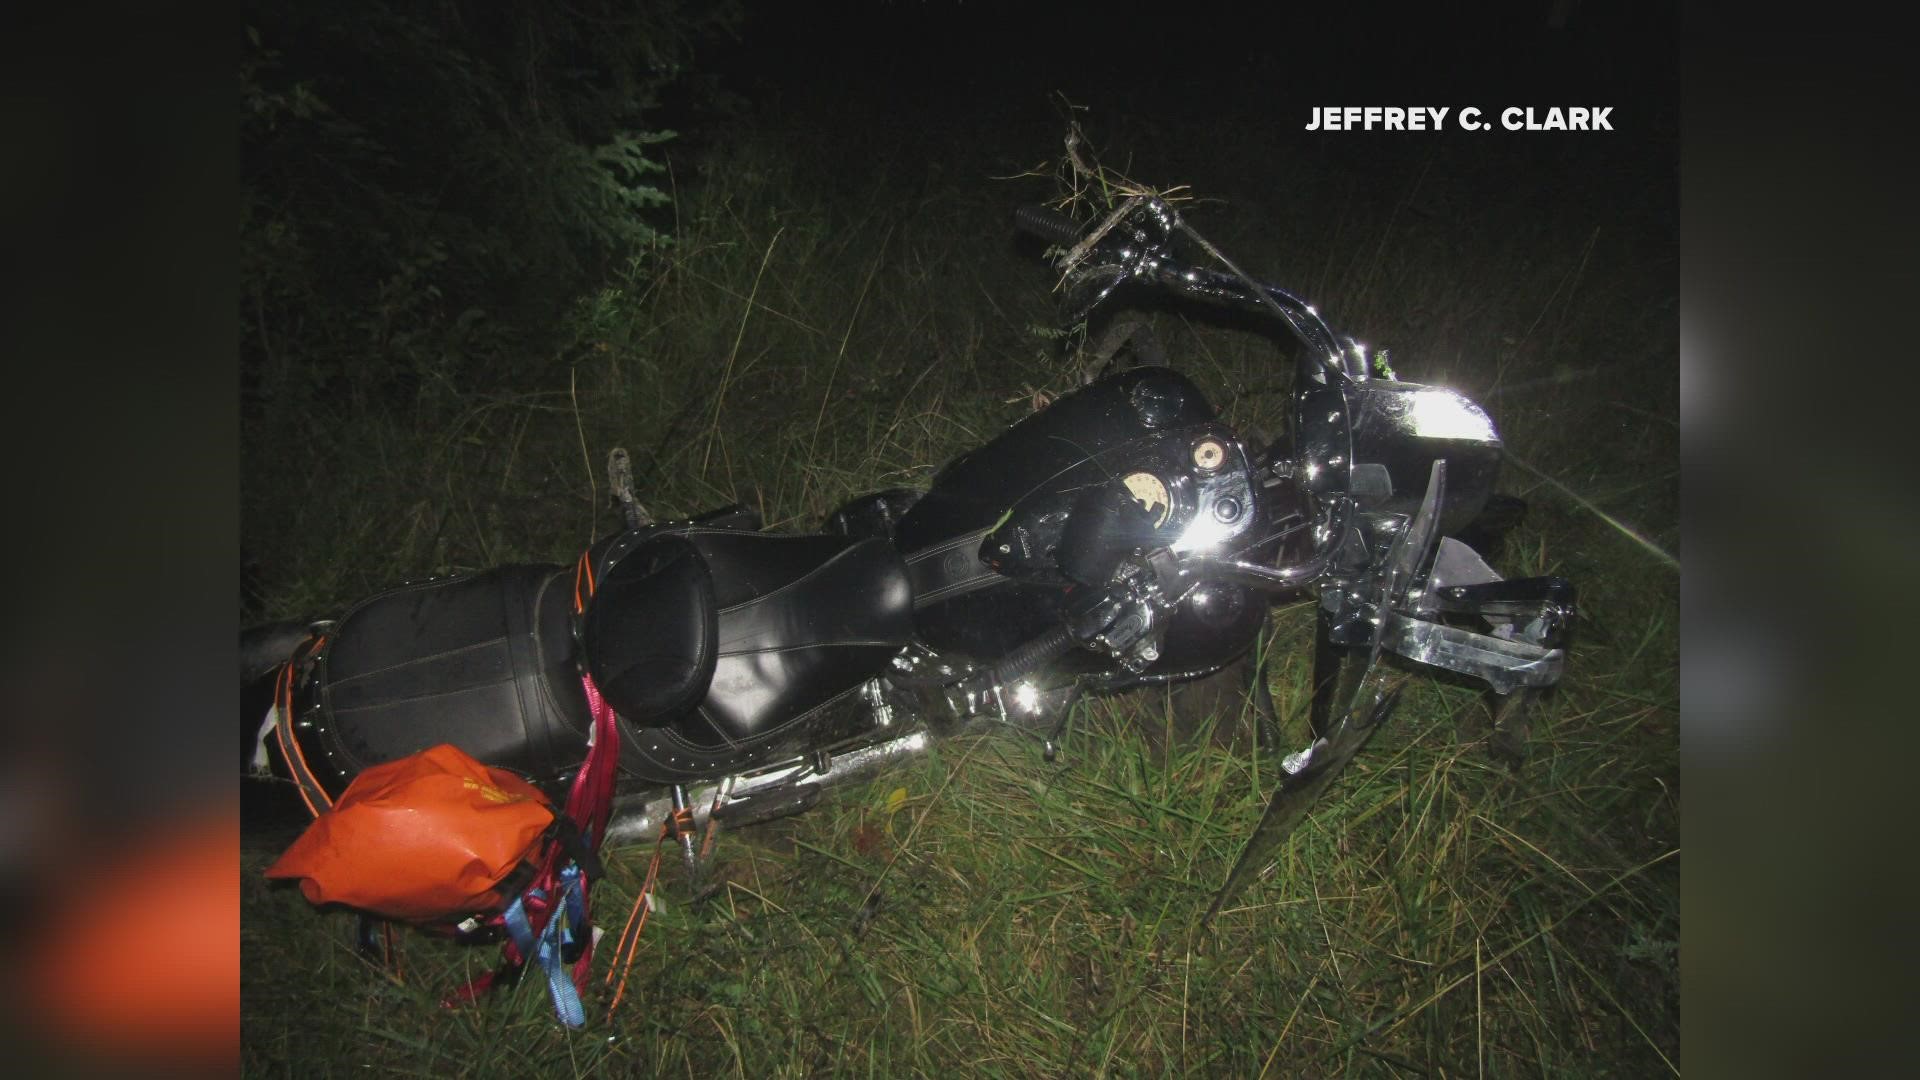 A man is recovering in the hospital tonight after he was struck by a moose while riding his motorcycle.